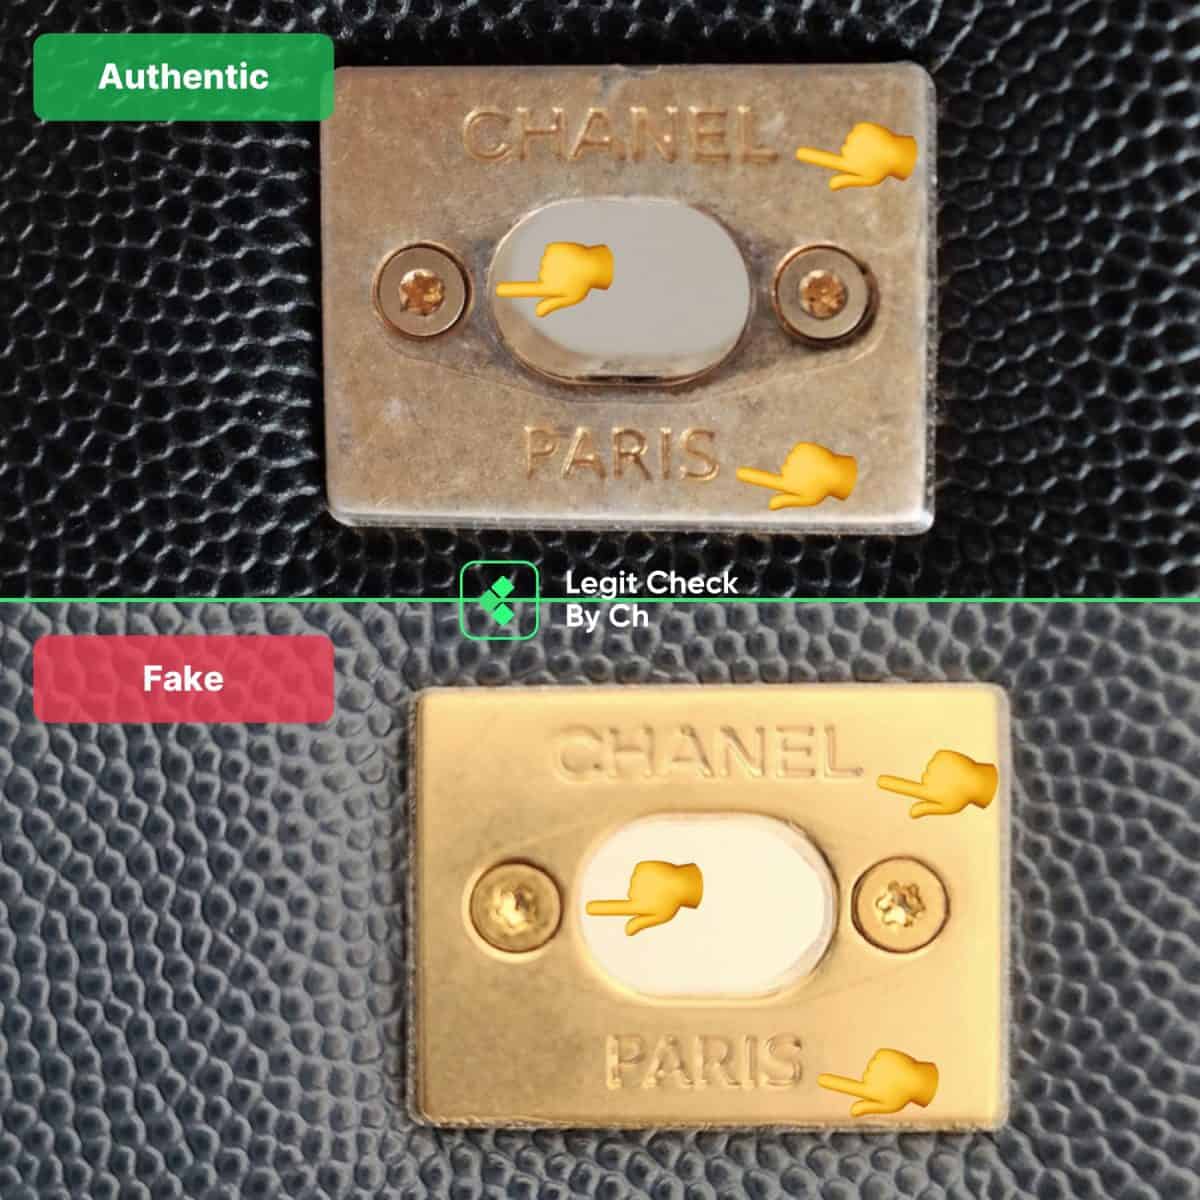 Comparison of the authentic and fake Chanel bags for their buckle engravings